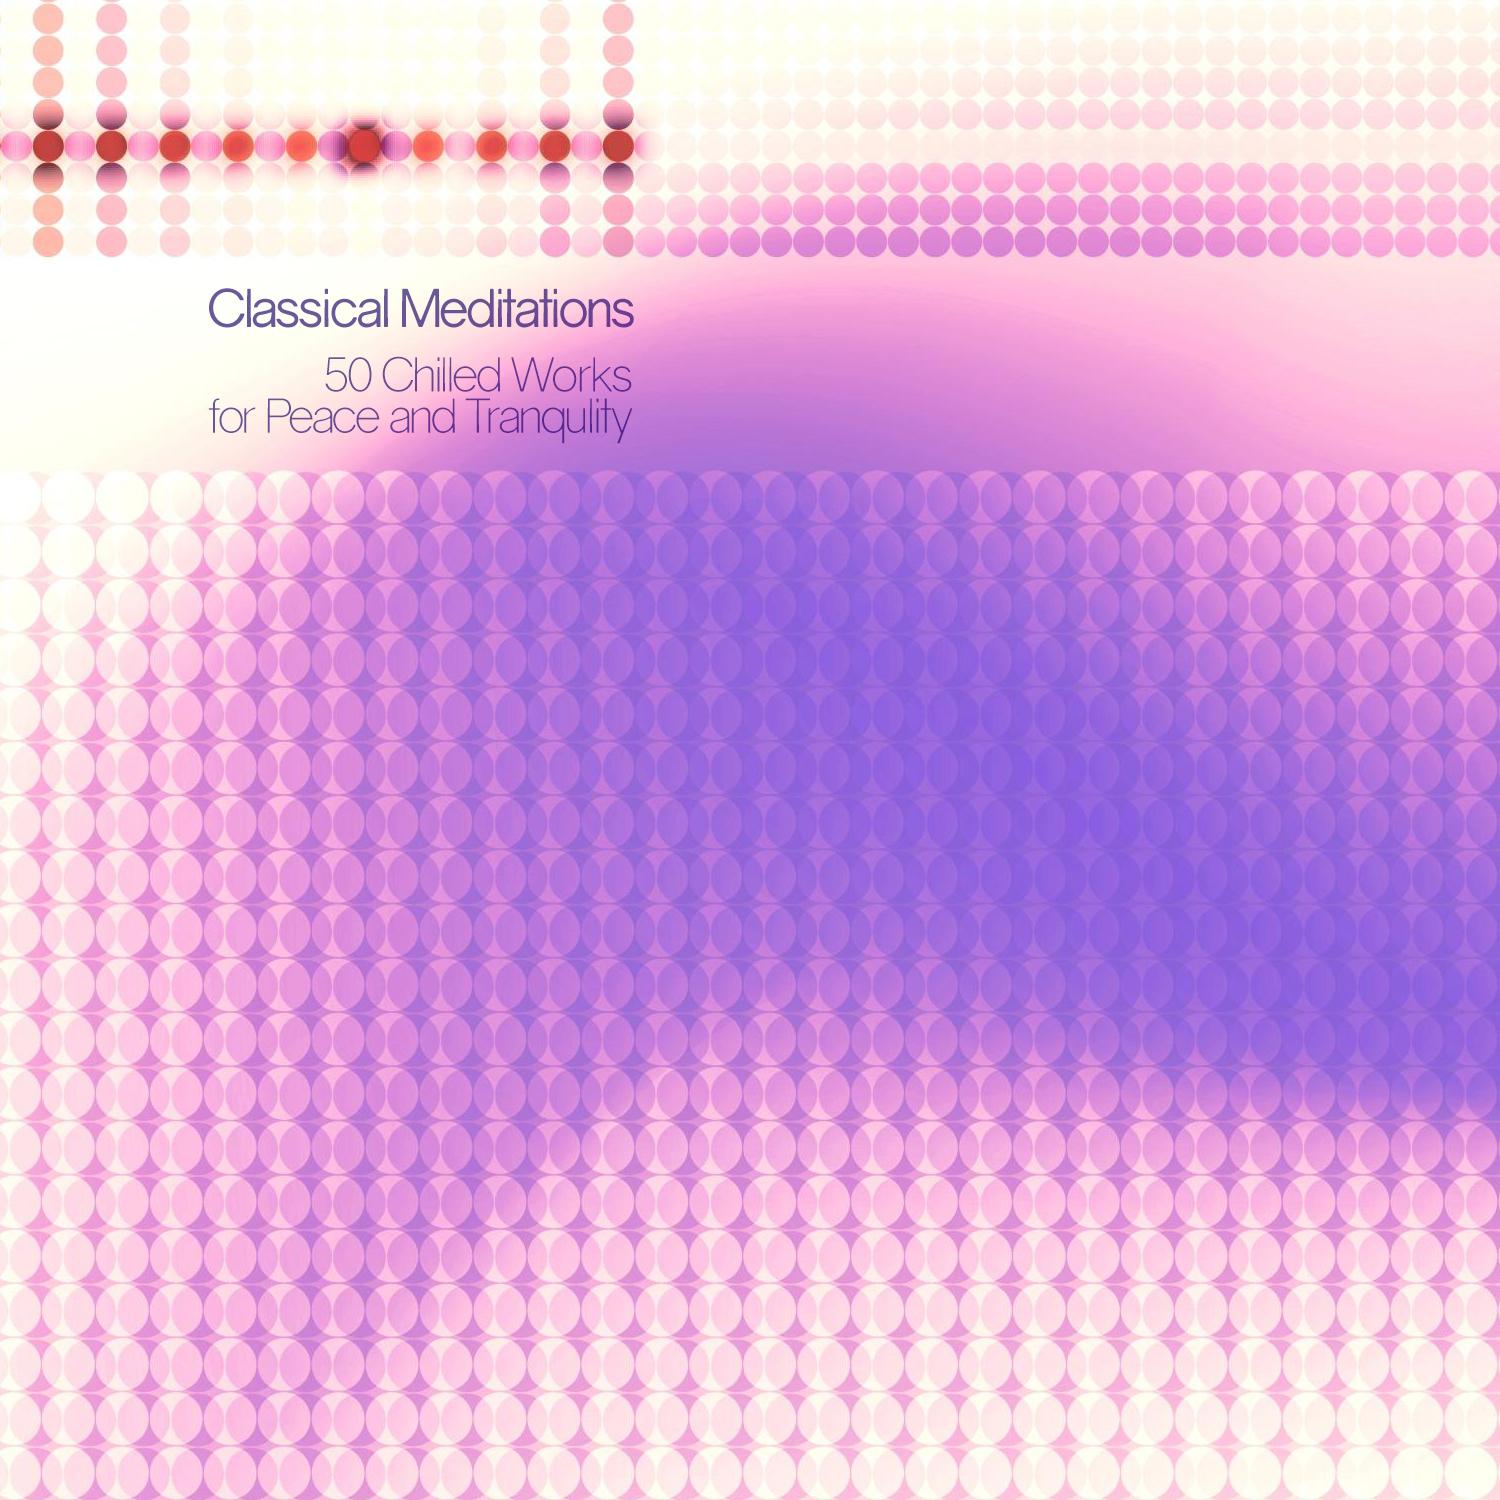 Concerto in C Minor for Piano, Trumpet, and String Orchestra, Op. 35: II. Lento